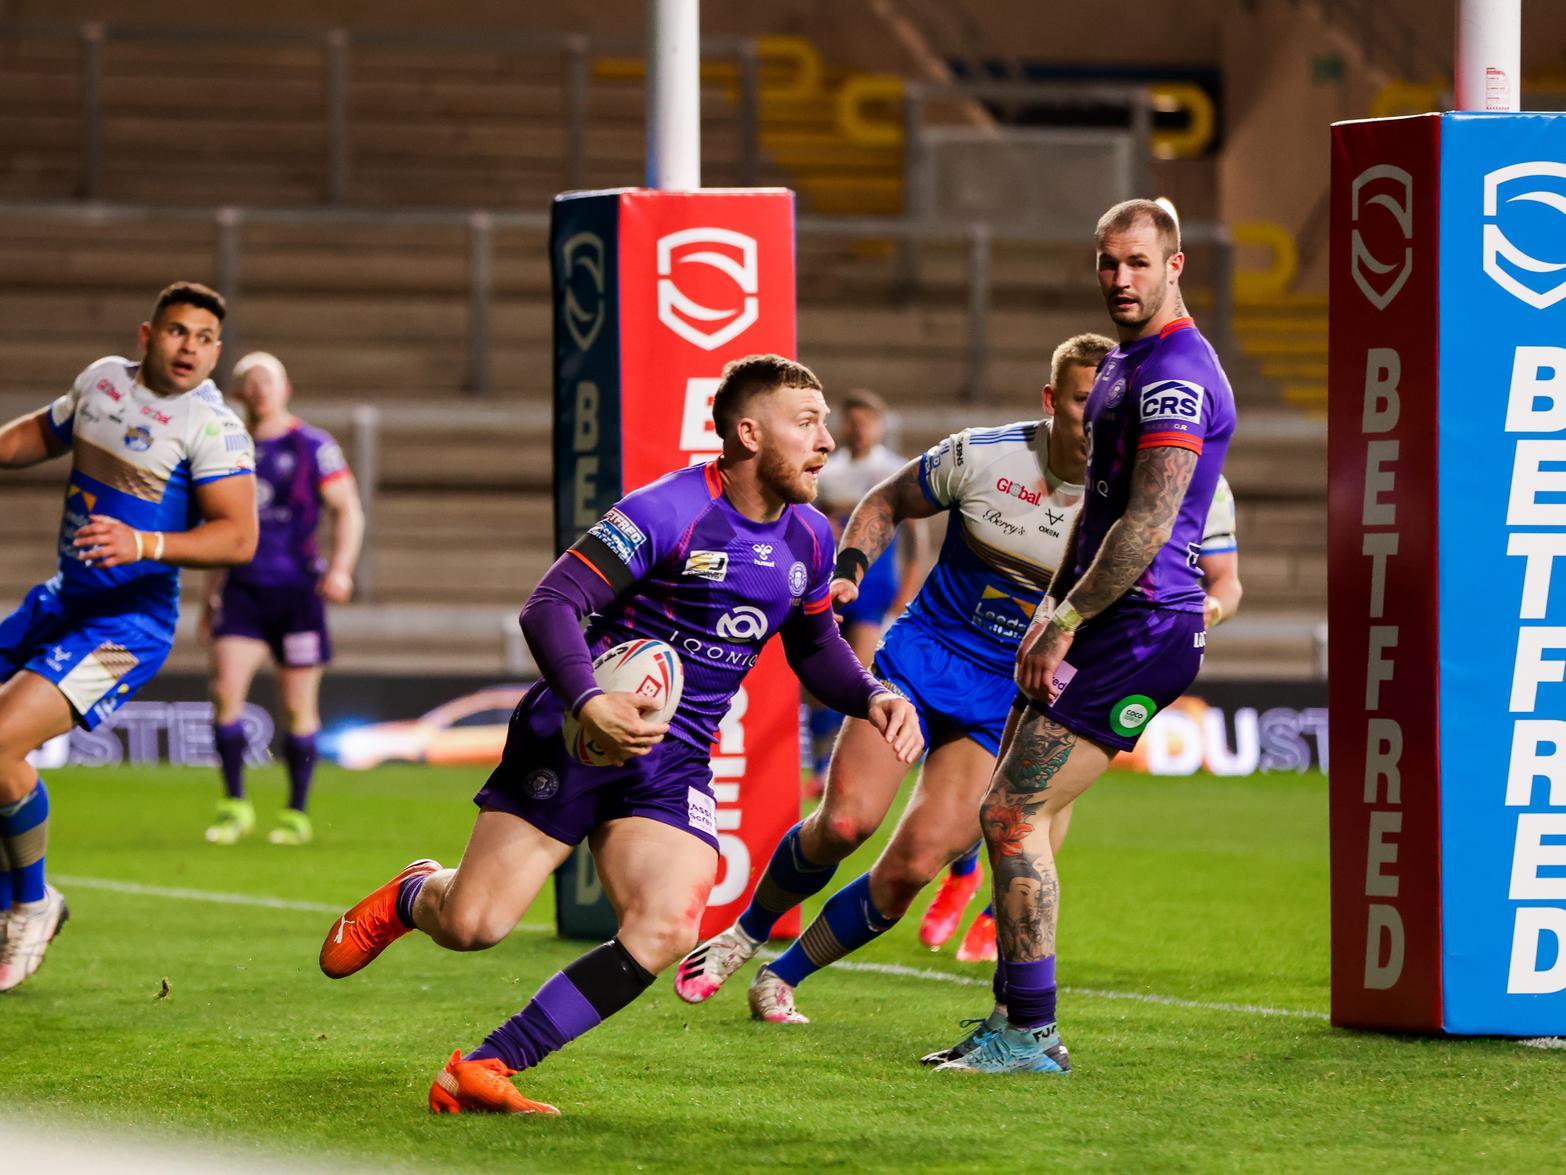 Exclusive Live Betfred Super League games could be on terrestrial TV from next year